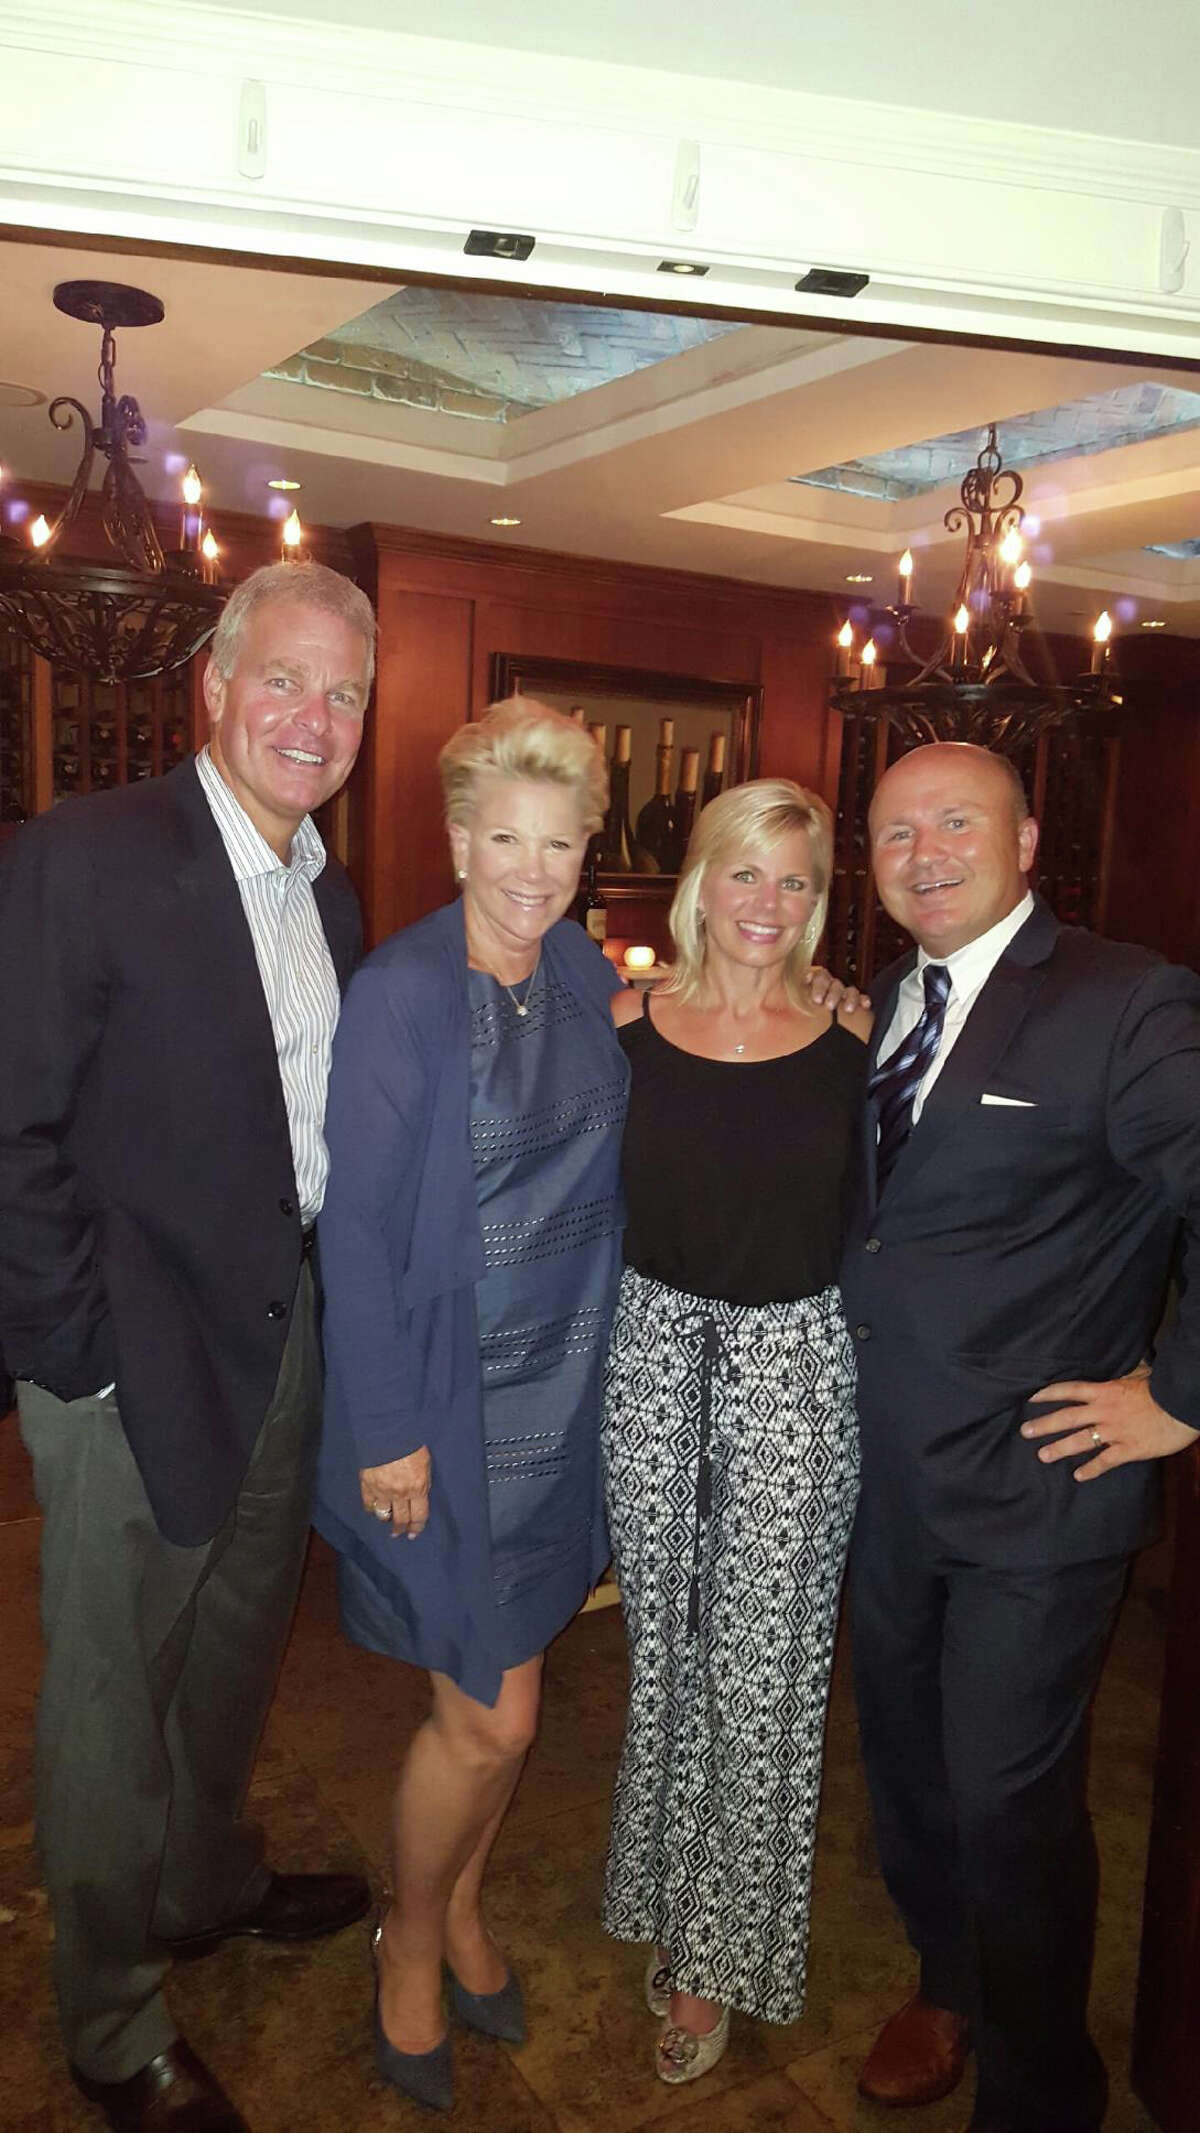 Joan Lunden (second from left) with her husband Jeff Konigsberg, Gretchen Carlson and Gabriele's Managing Partner and Maitre'd Tony Capasso at Gabriele's Italian Steakhouse in Greenwich last week.